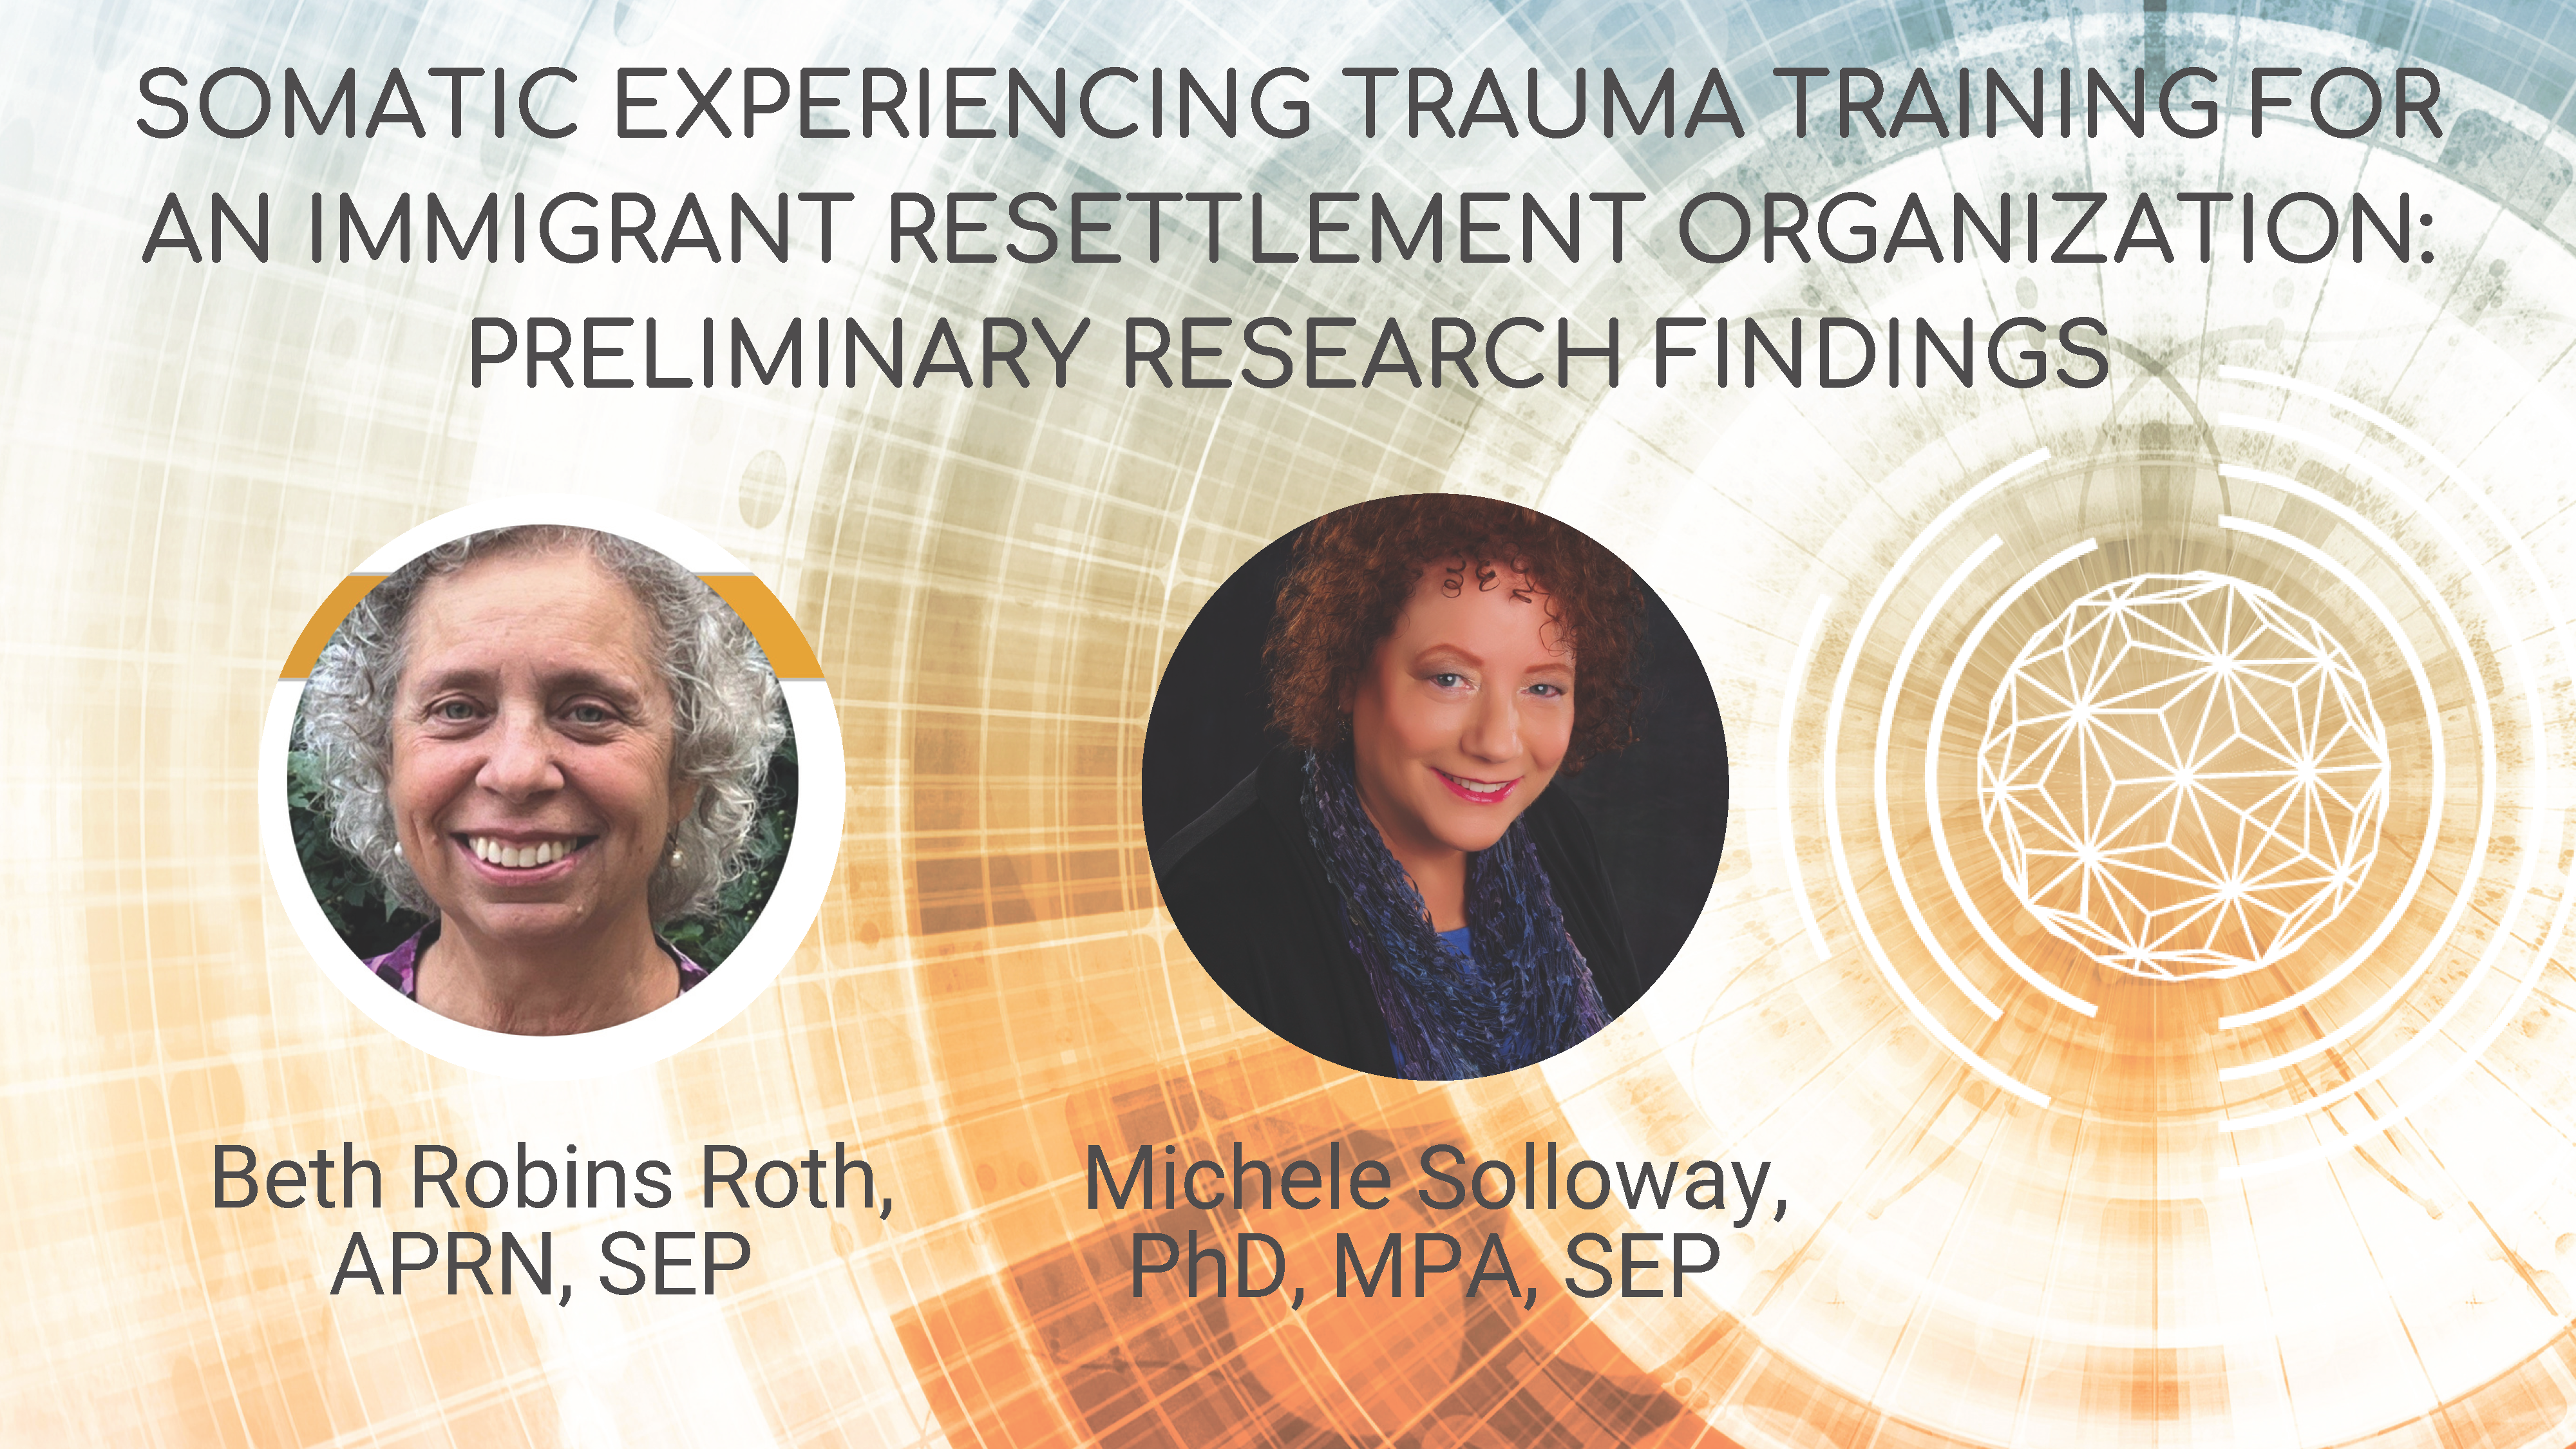 SE Trauma Training for an Immigrant Resettlement Org. – Beth Robins Roth, APRN, SEP & Michele Solloway, PhD, MPA, SEP